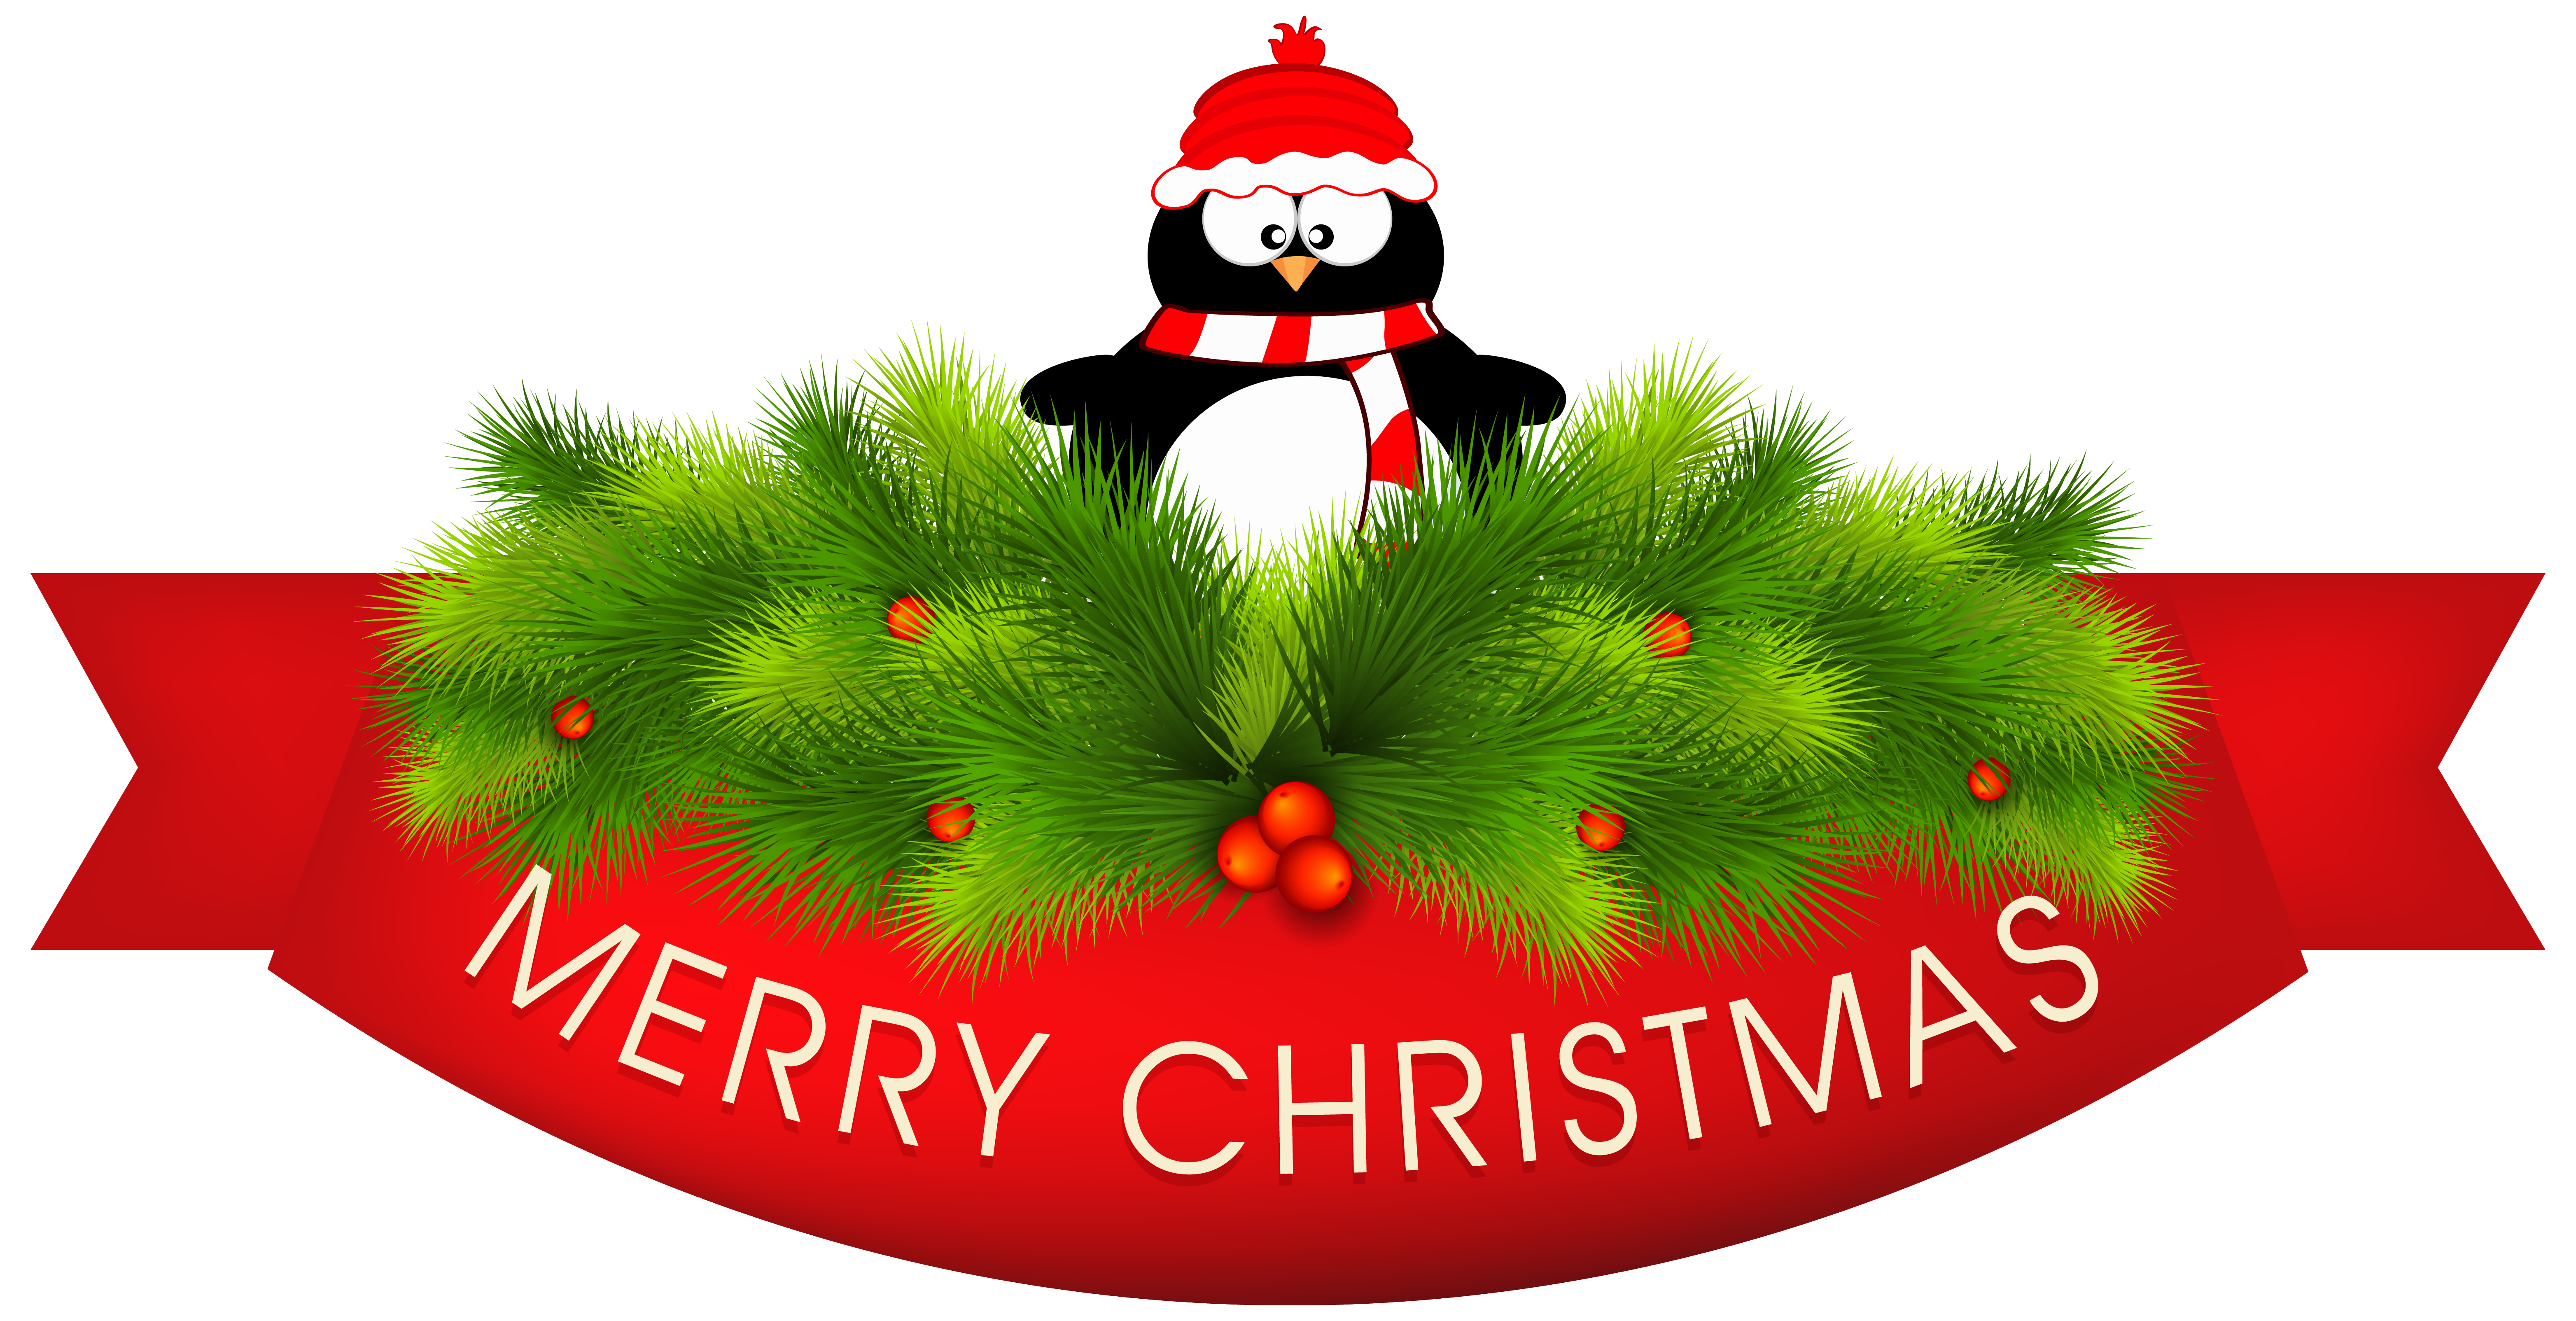 Merry Christmas Decor With Penguin PNG Clipart Image Gallery